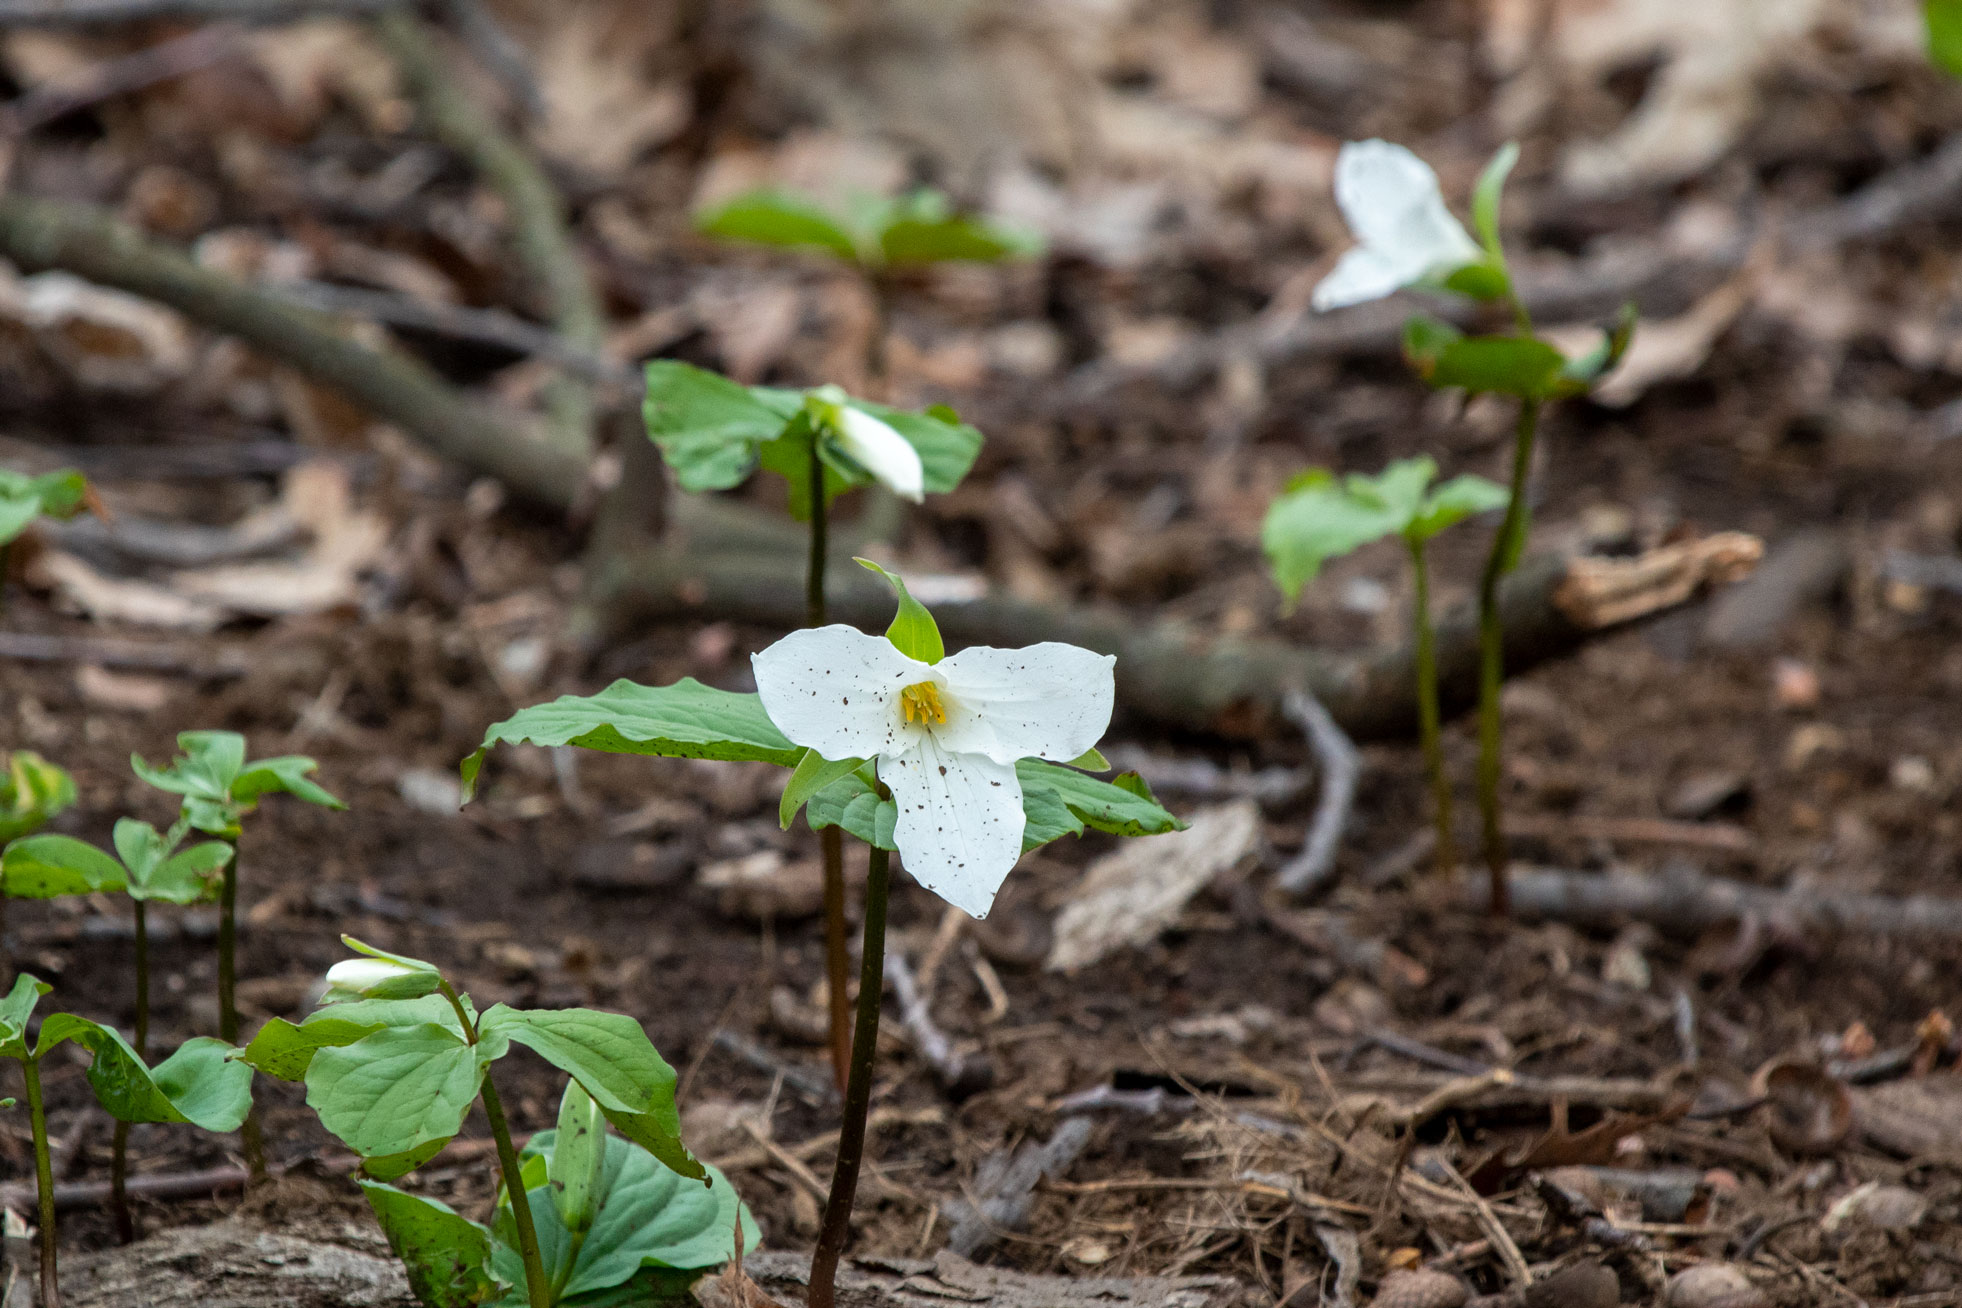 A trillium on the forest floor speckled with mud